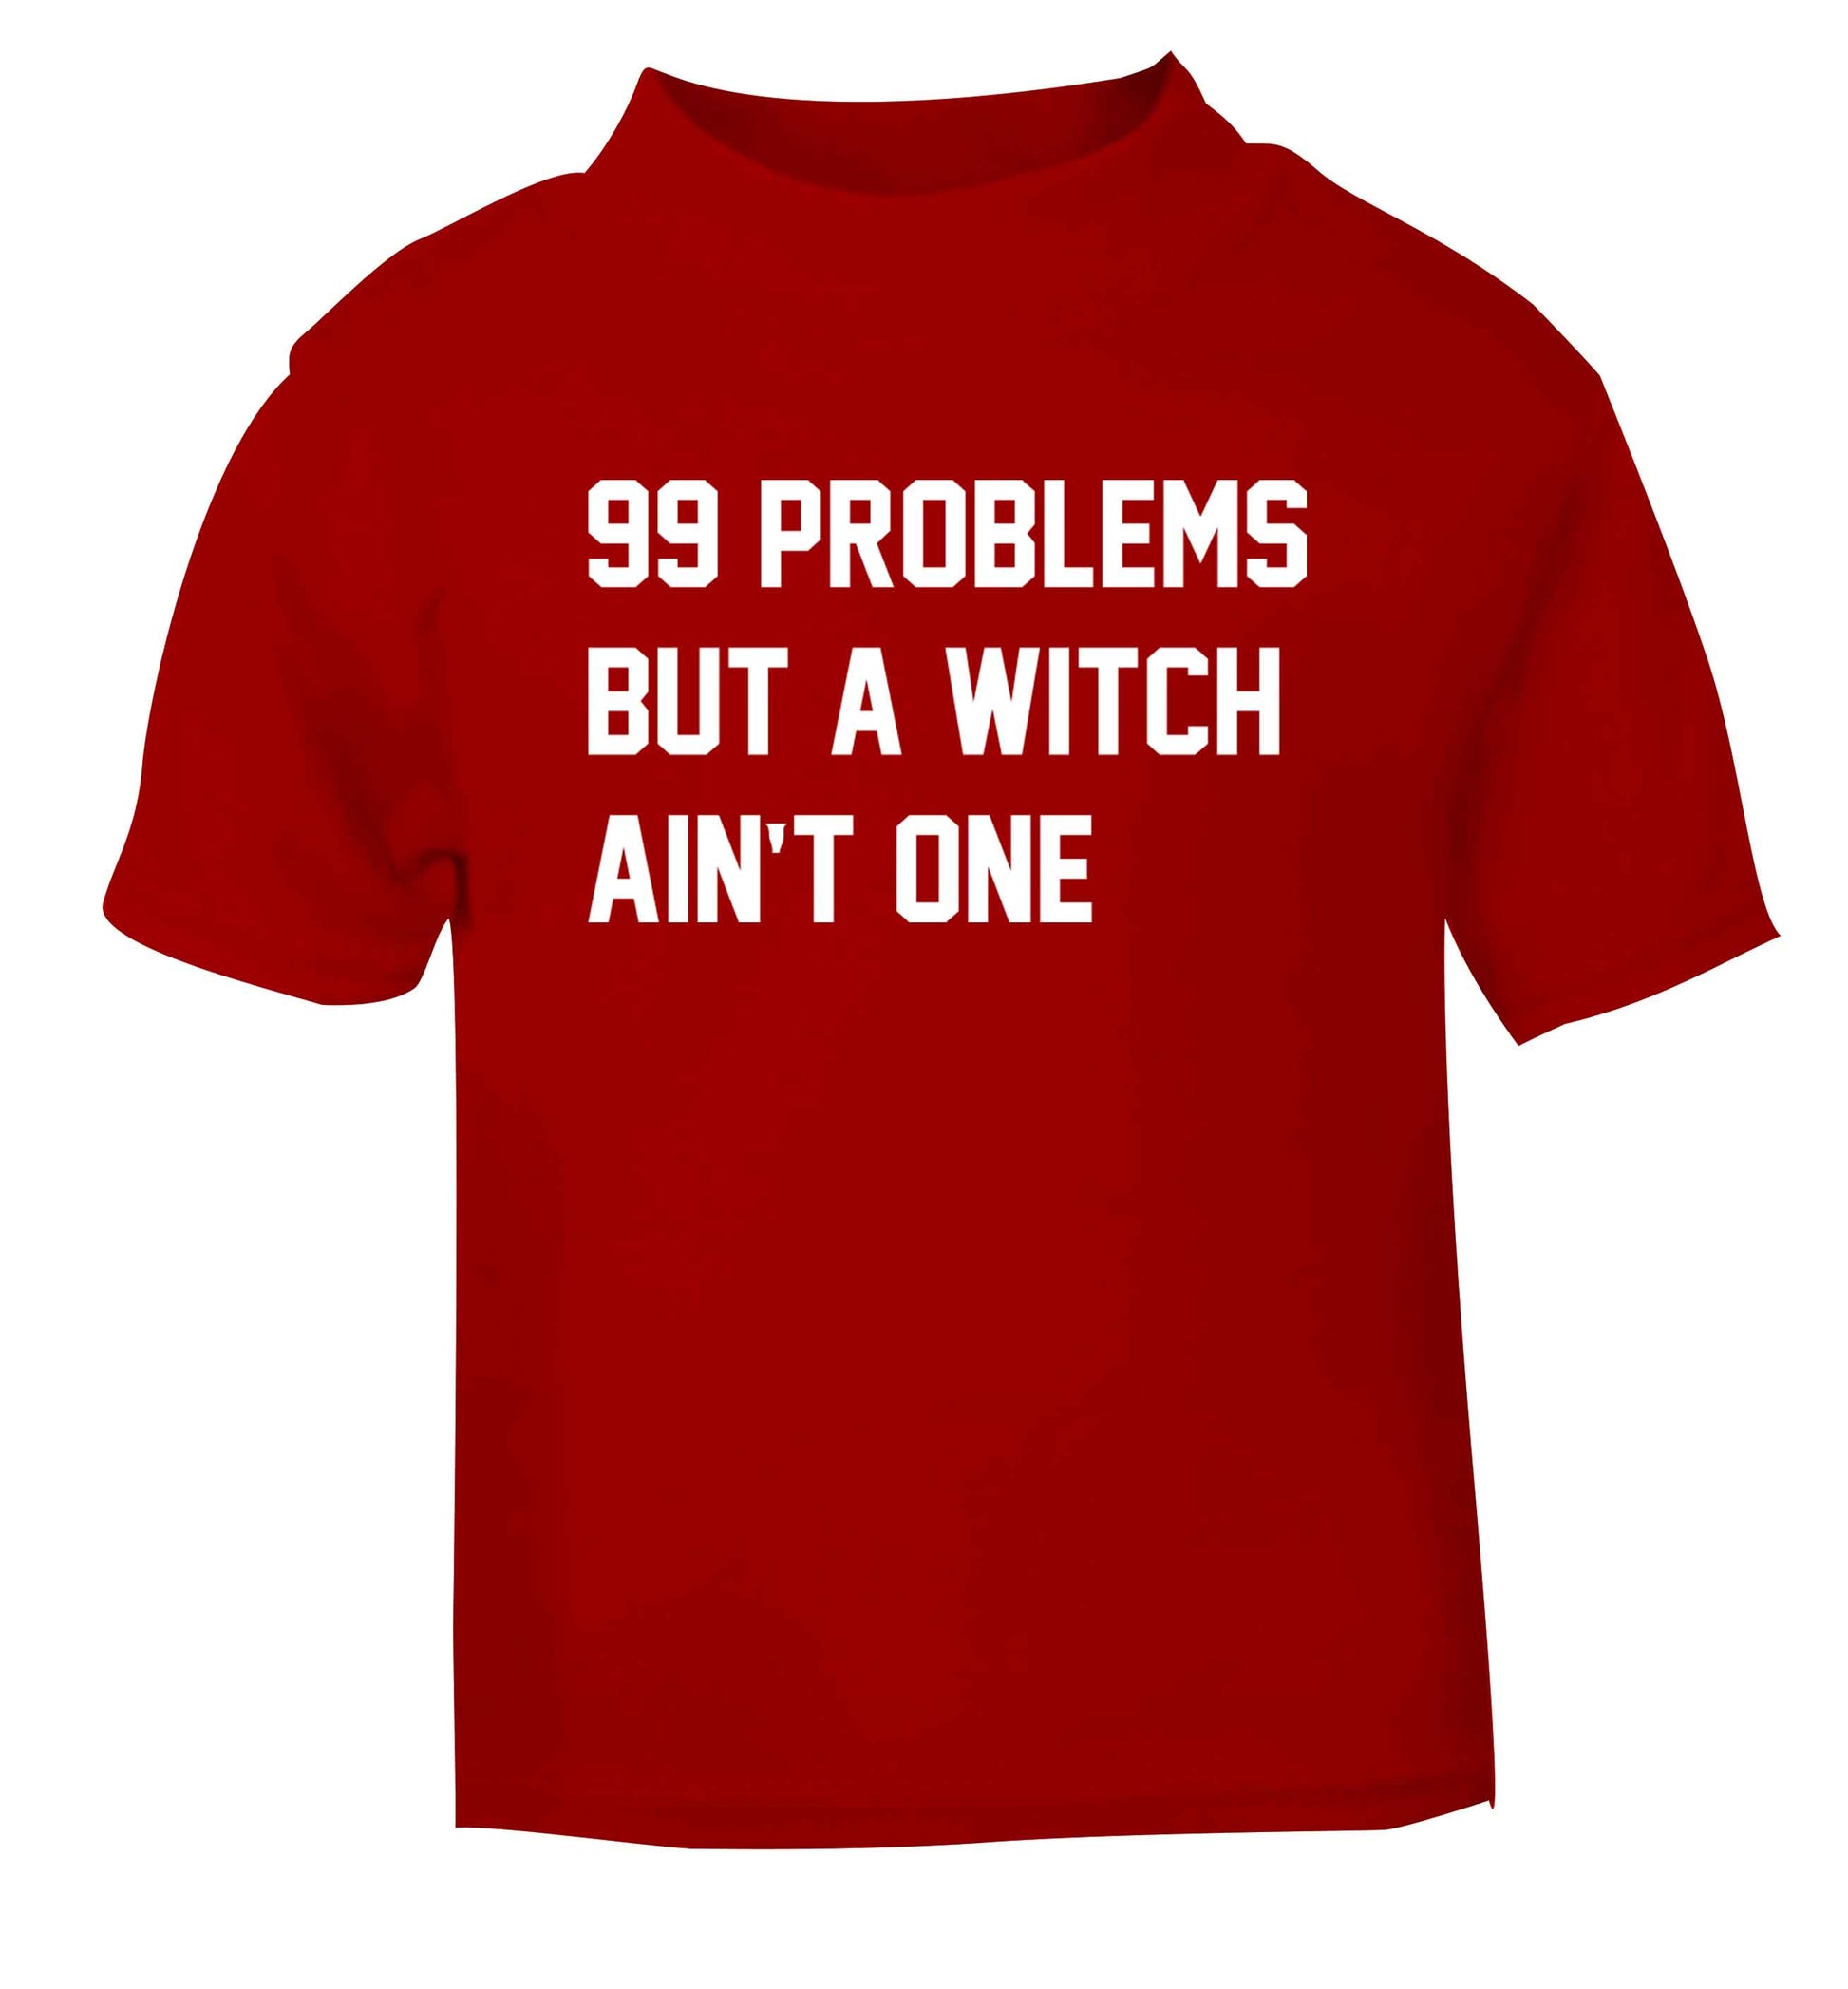 99 Problems but a witch aint one red baby toddler Tshirt 2 Years